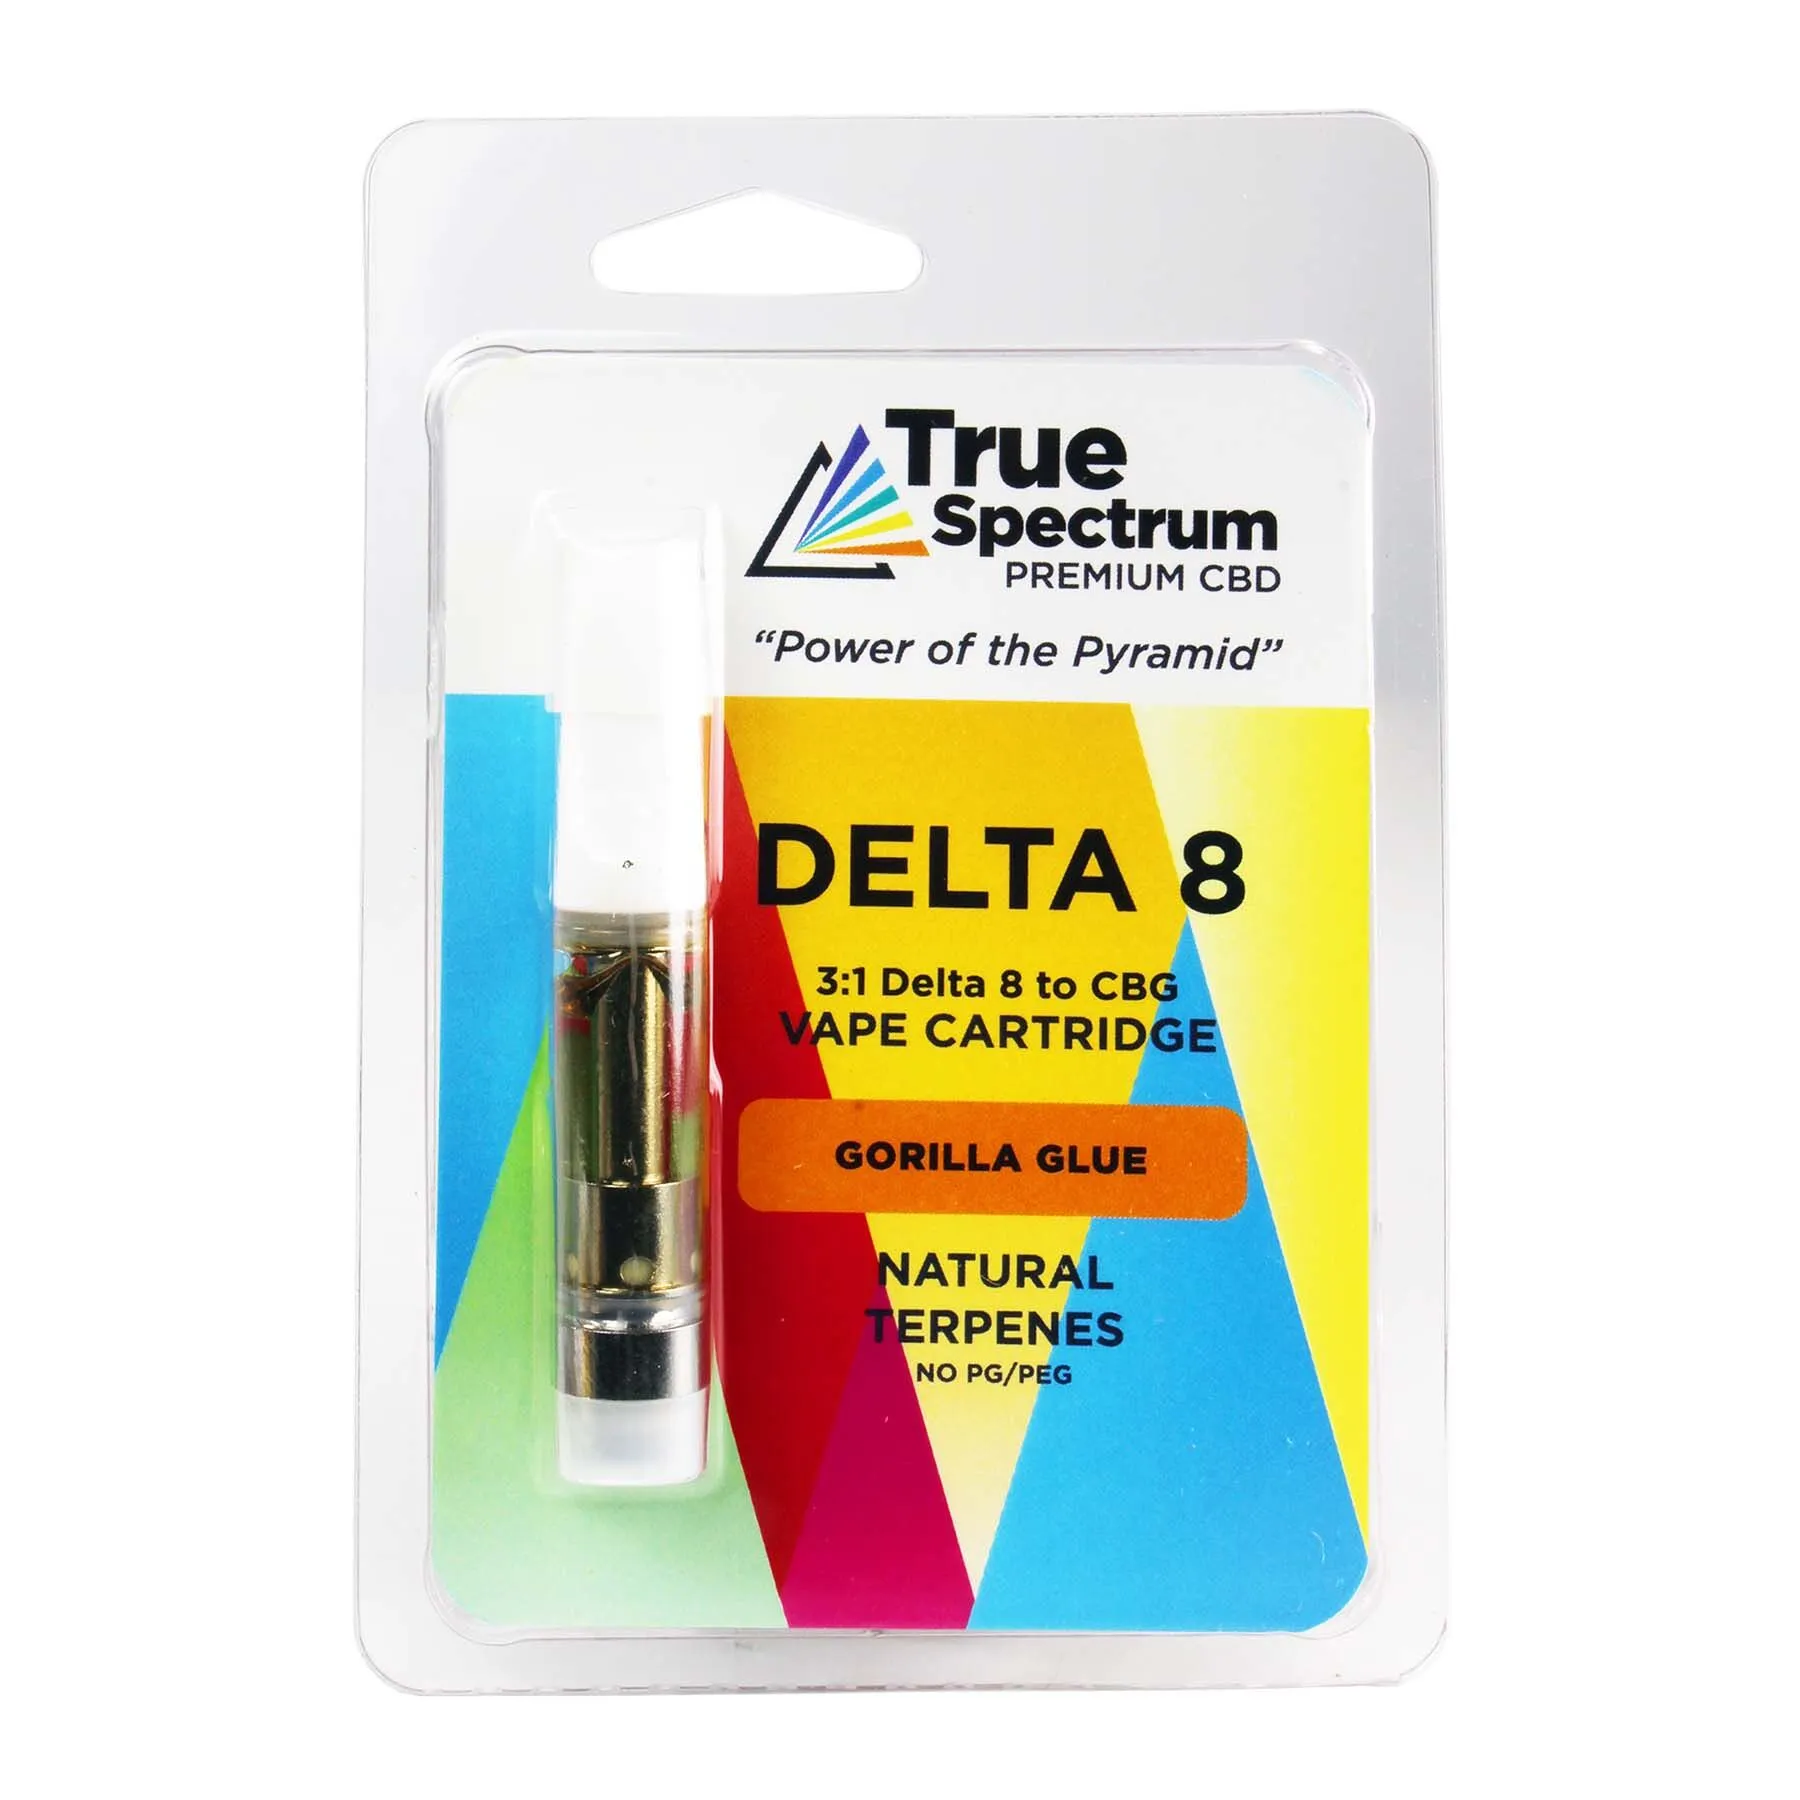 Delta 8 & 10 By My True Spectrum-Comprehensive Review of the Top Delta 8 & 10 Products